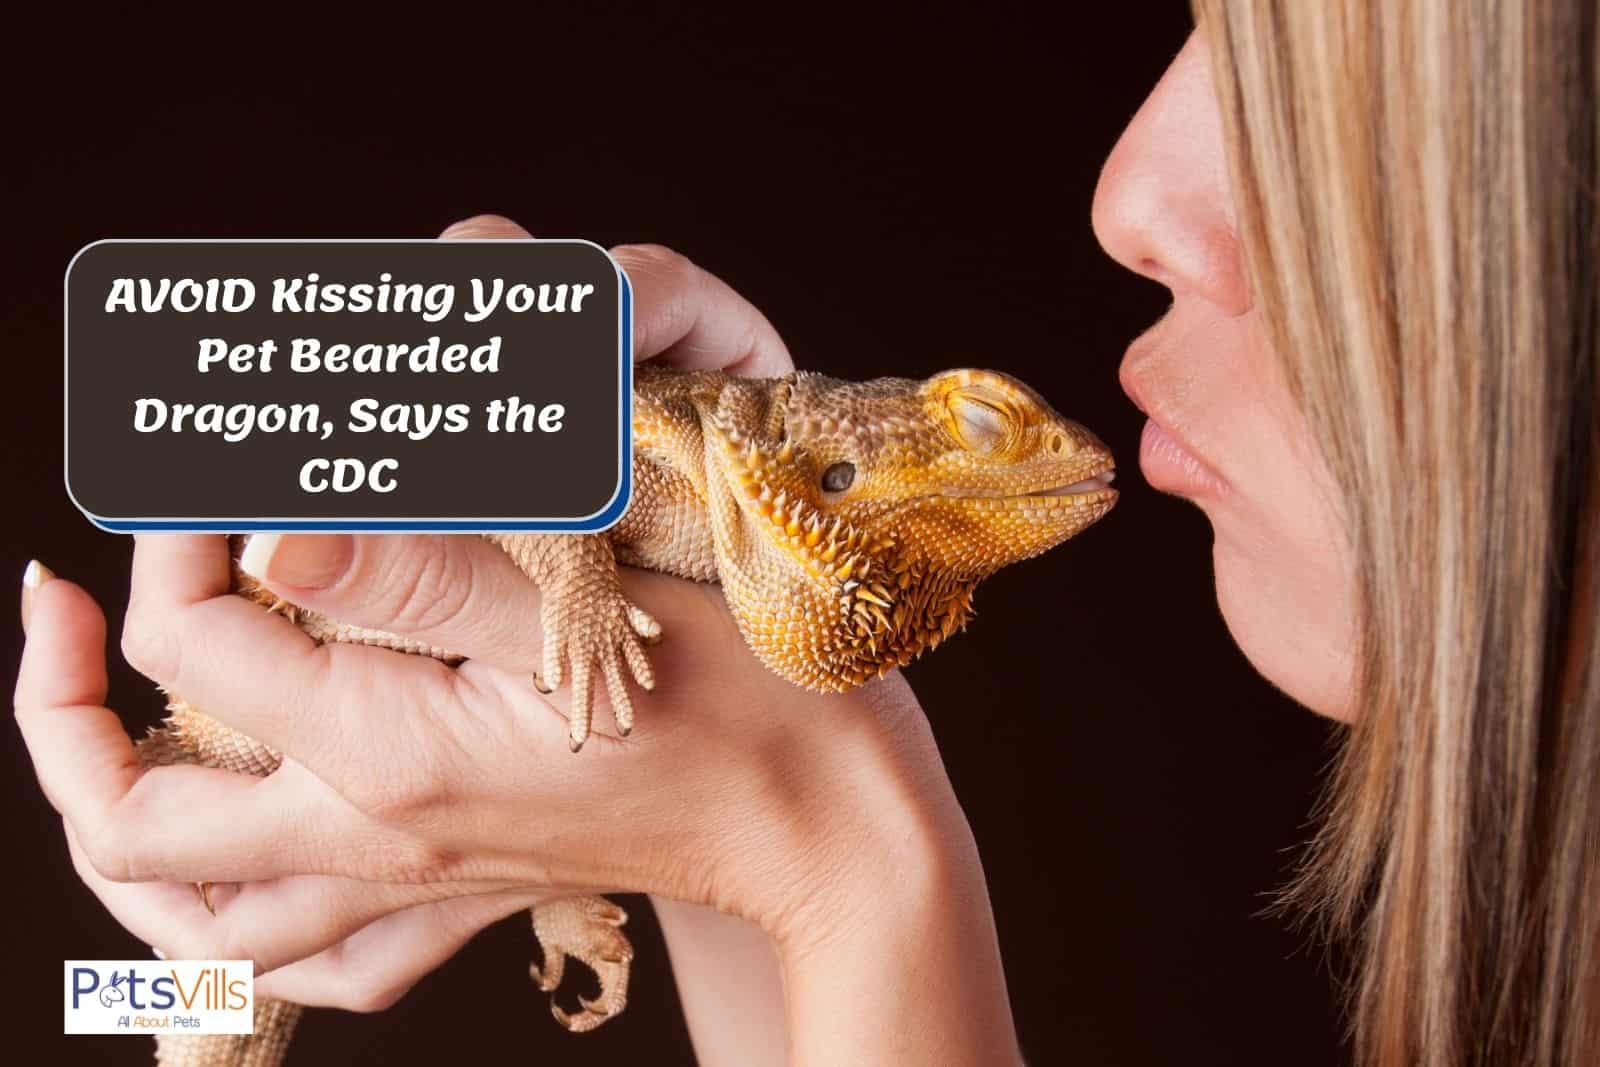 AVOID Kissing Your Pet Bearded Dragon, Says the CDC